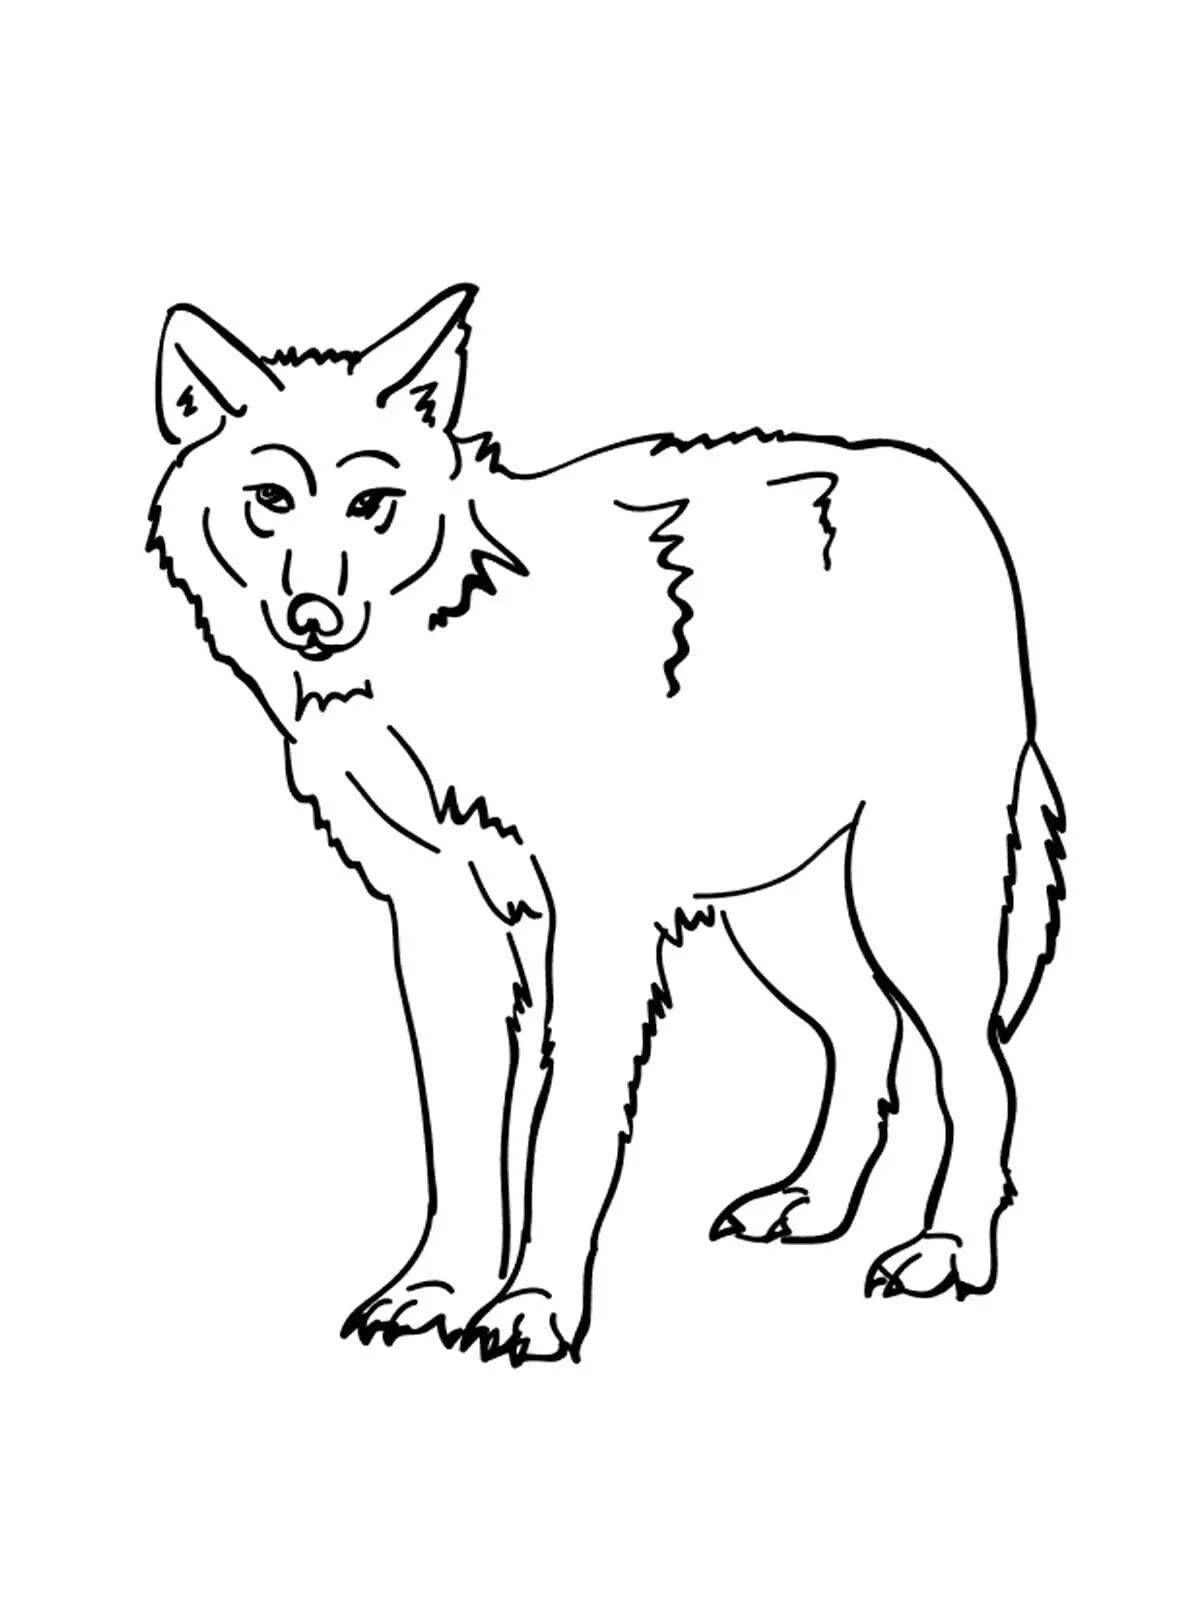 Spectacular wolf coloring book for kids